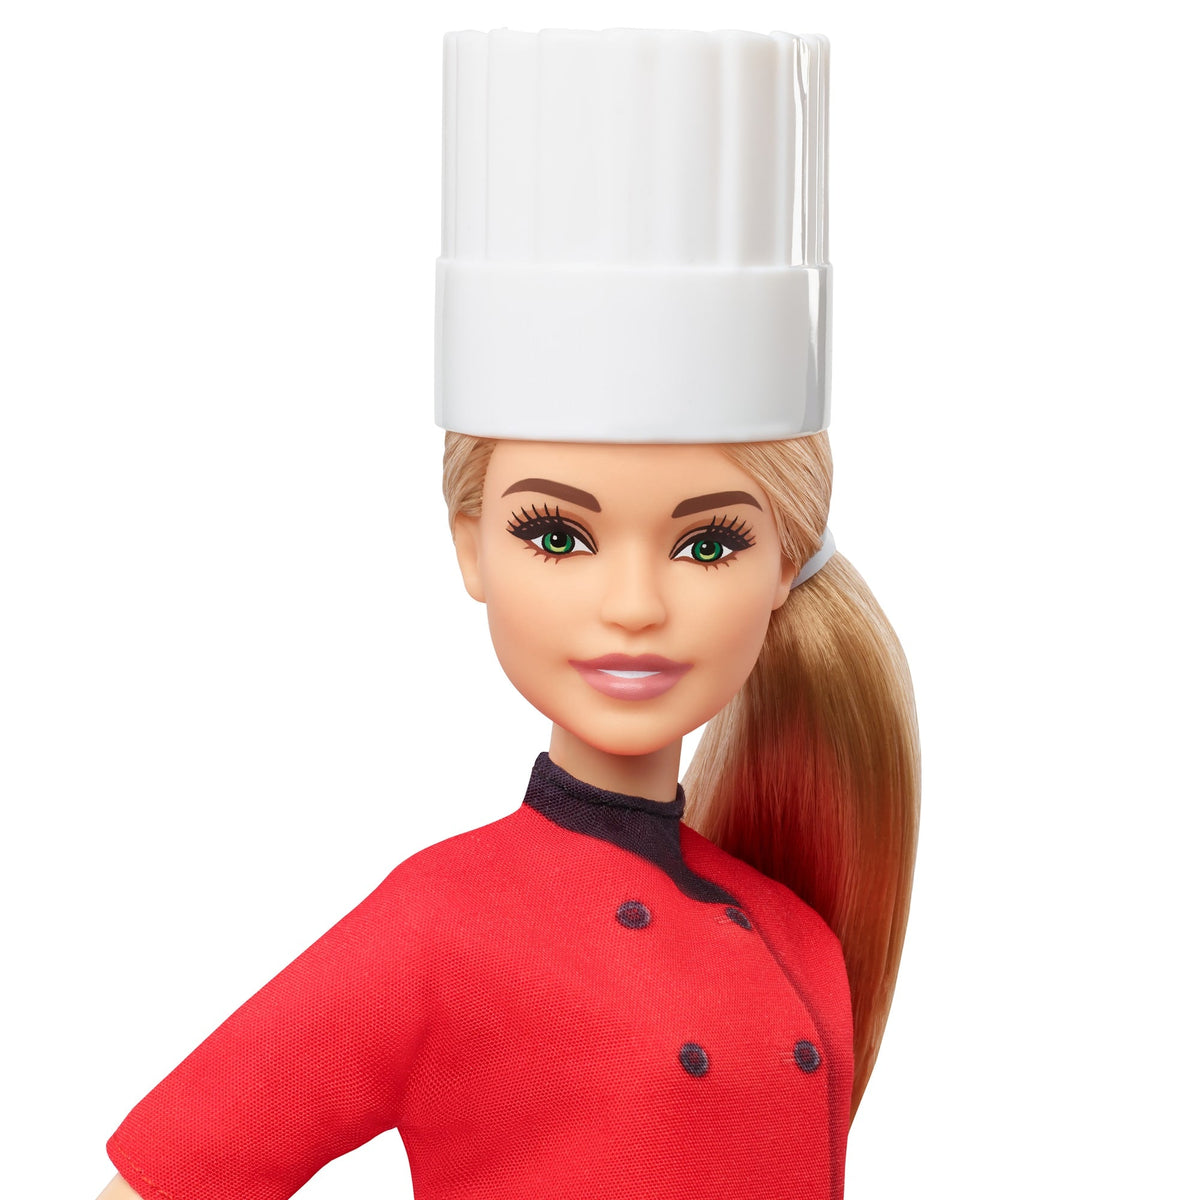 BARBIE CORE CAREER DOLL - CHEF